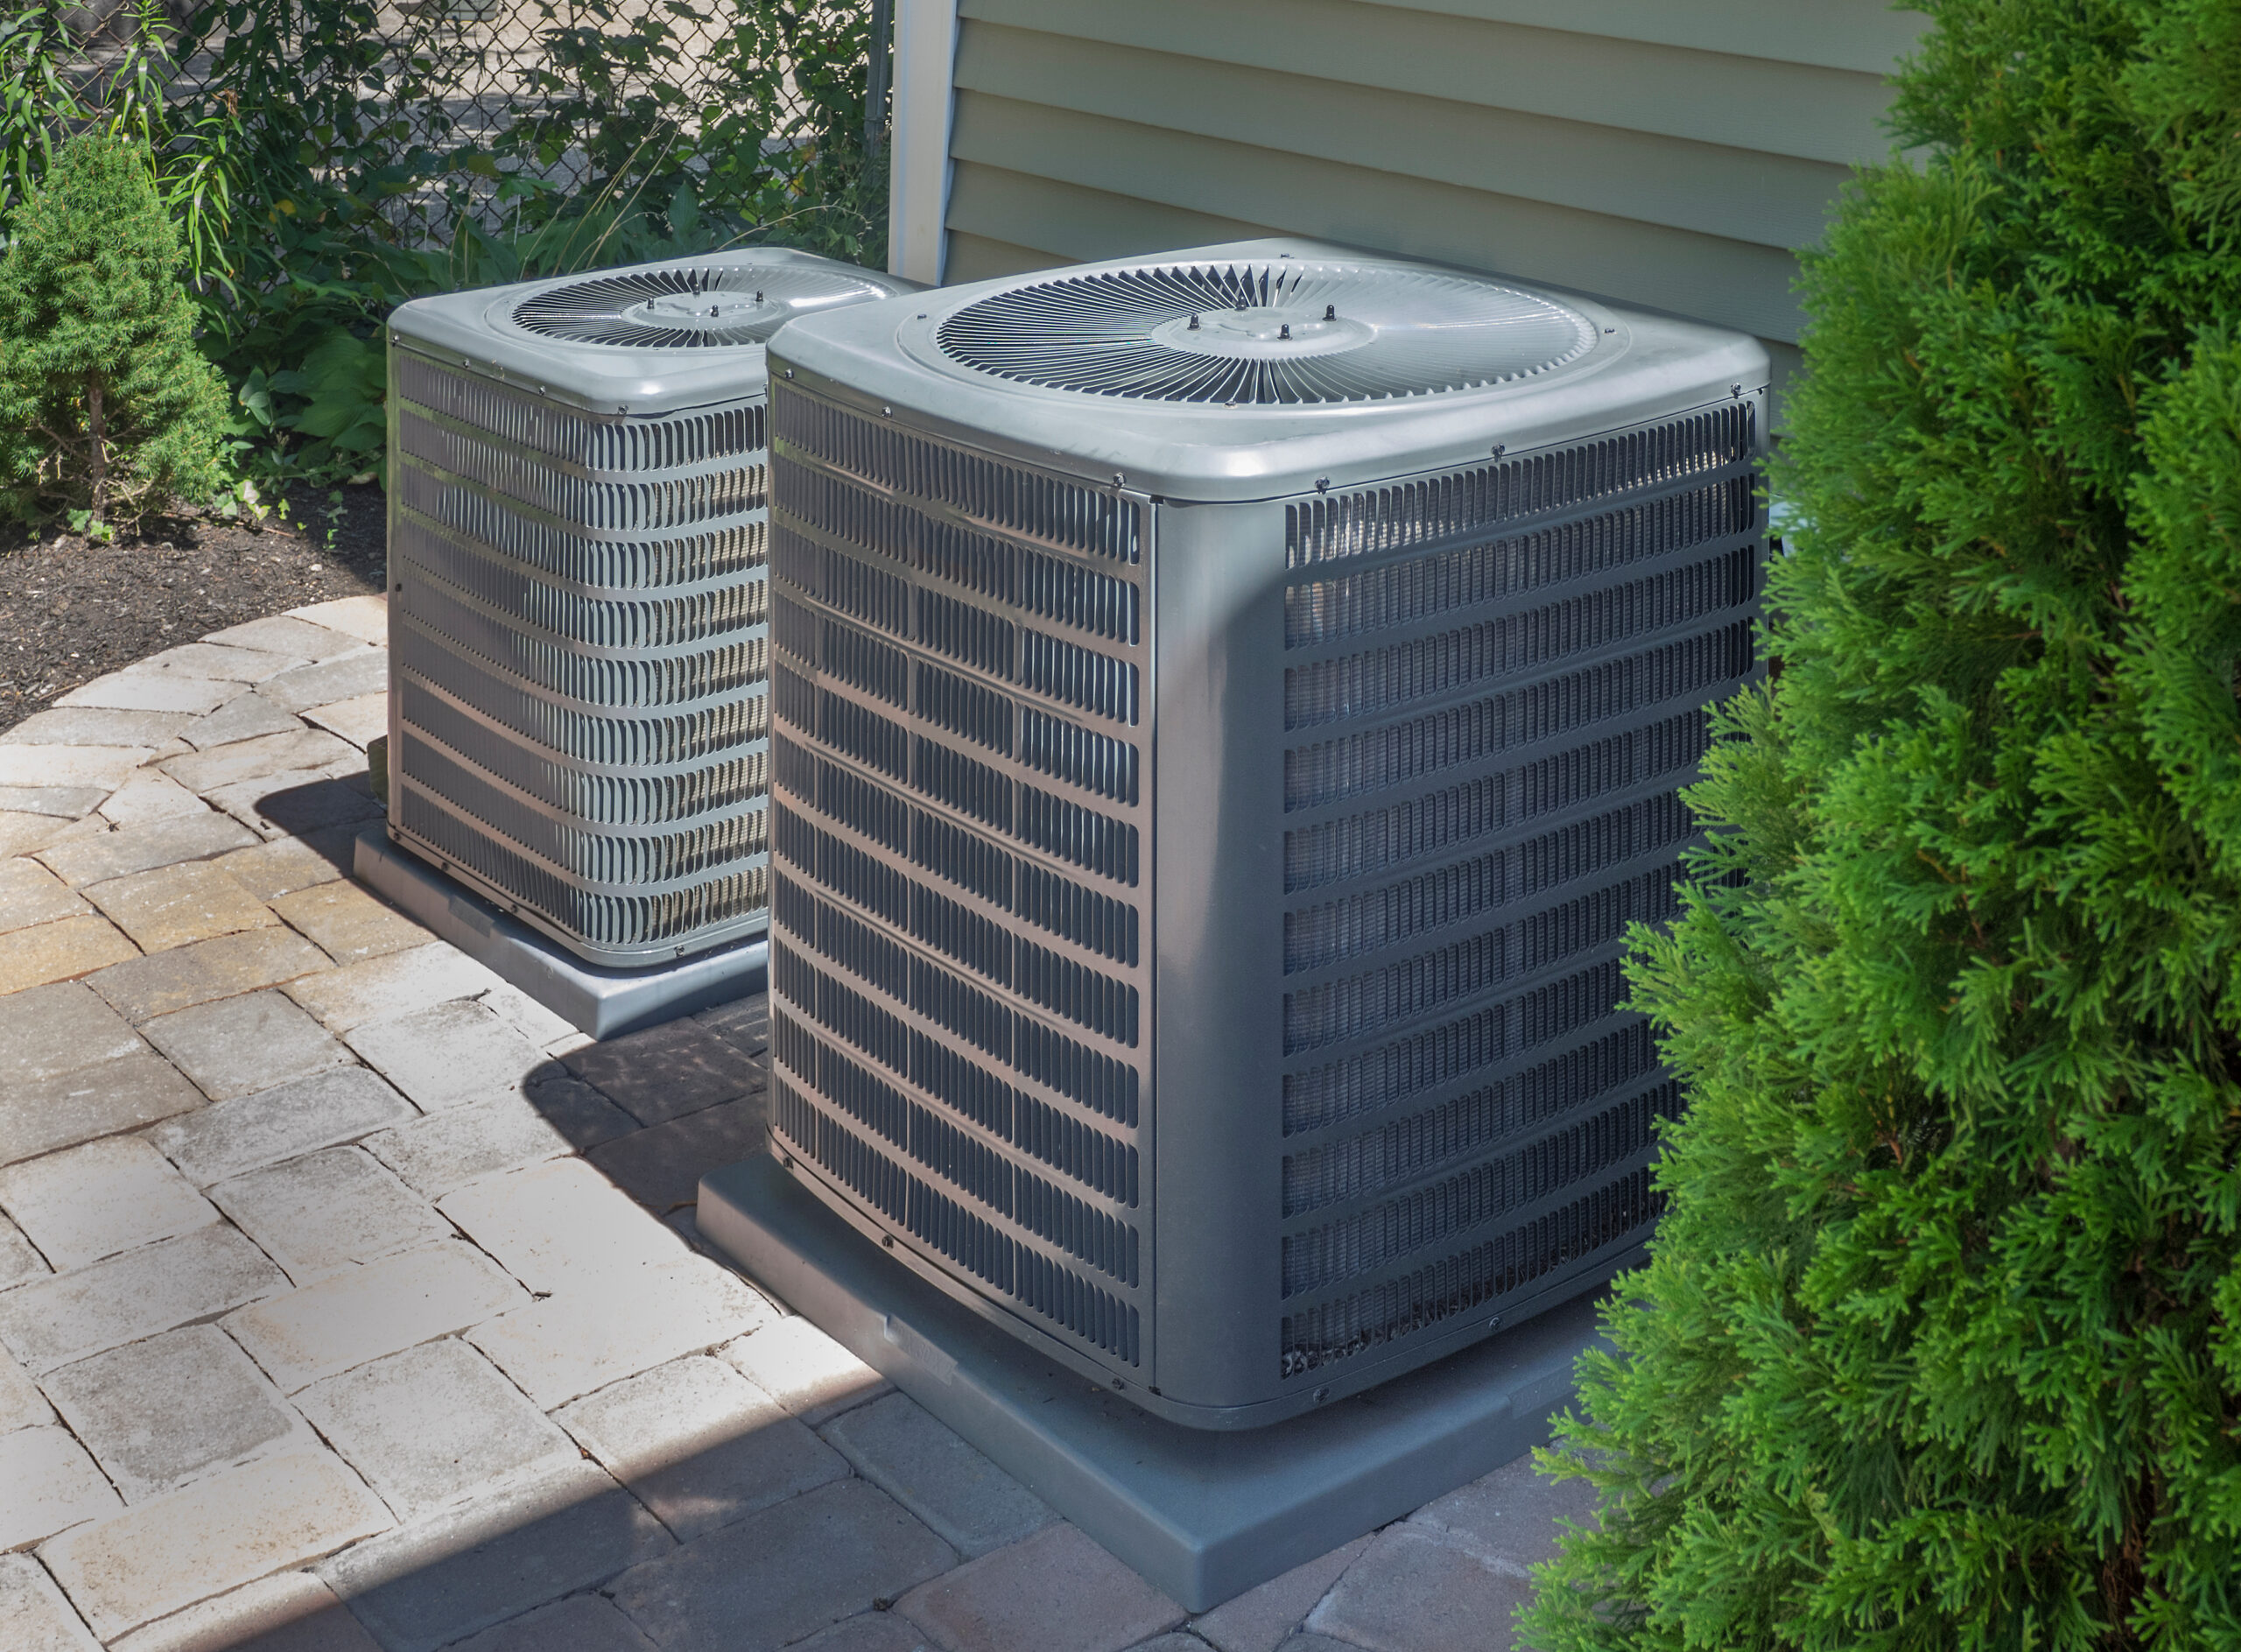 HVAC system allows your house to stay cool during the summer, Innovative Mechanical, Belmont CA.